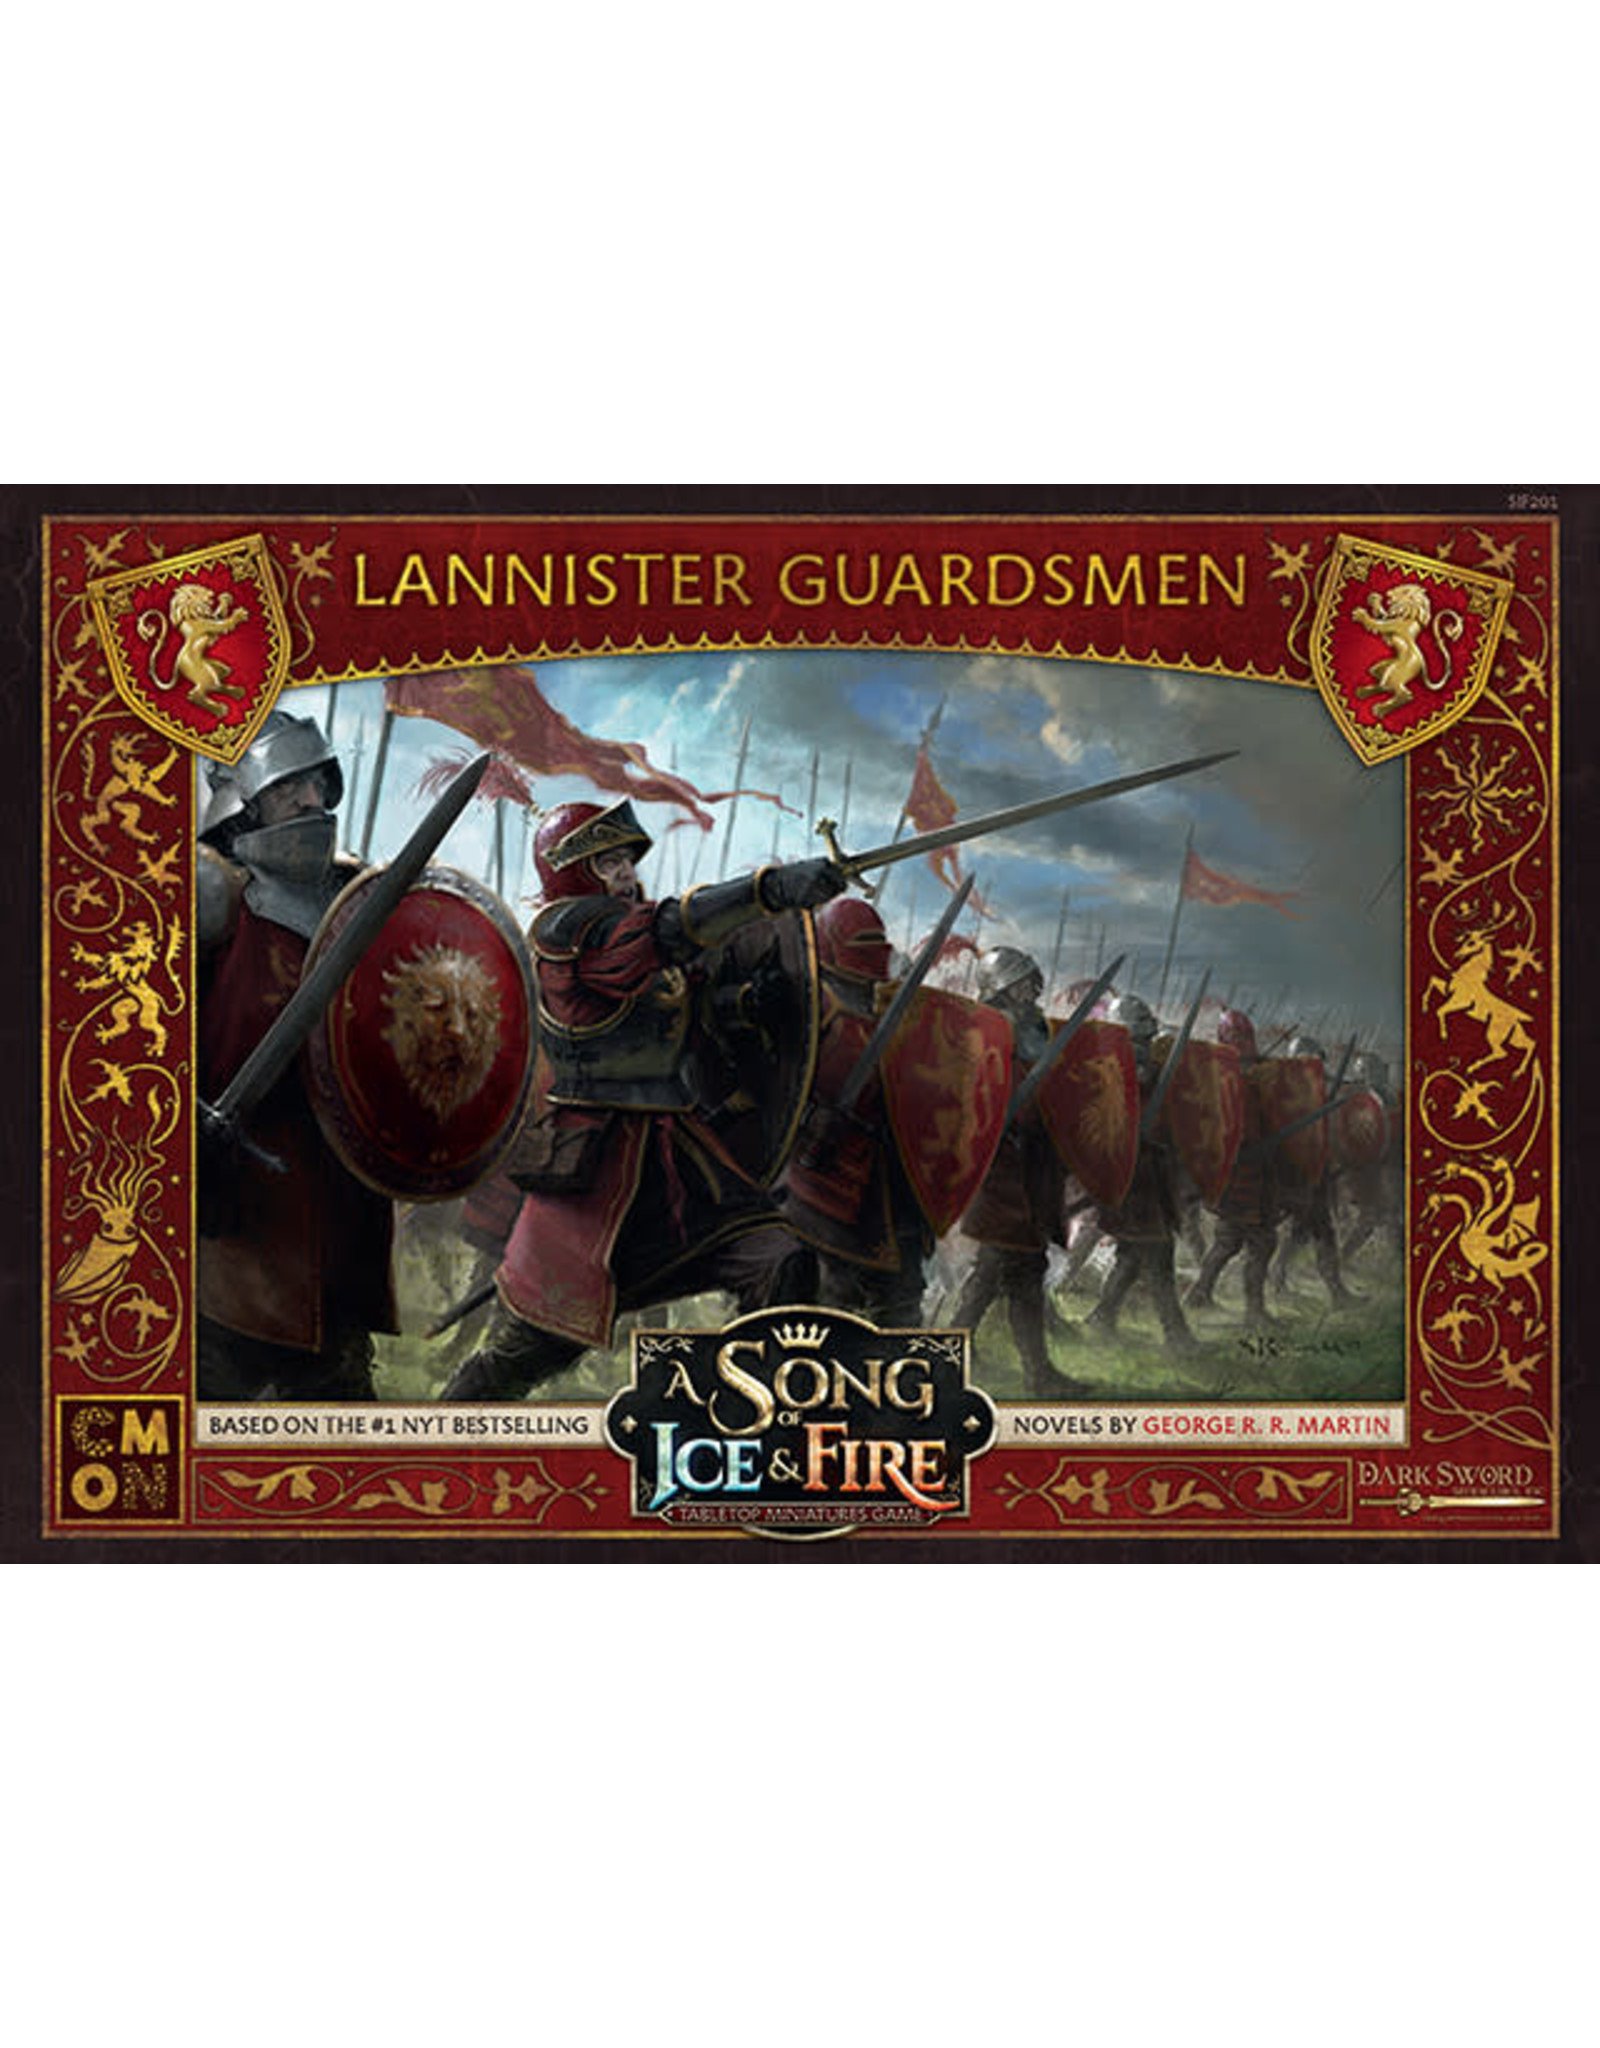 CMON A SONG OF ICE & FIRE: LANNISTER GUARDSMEN